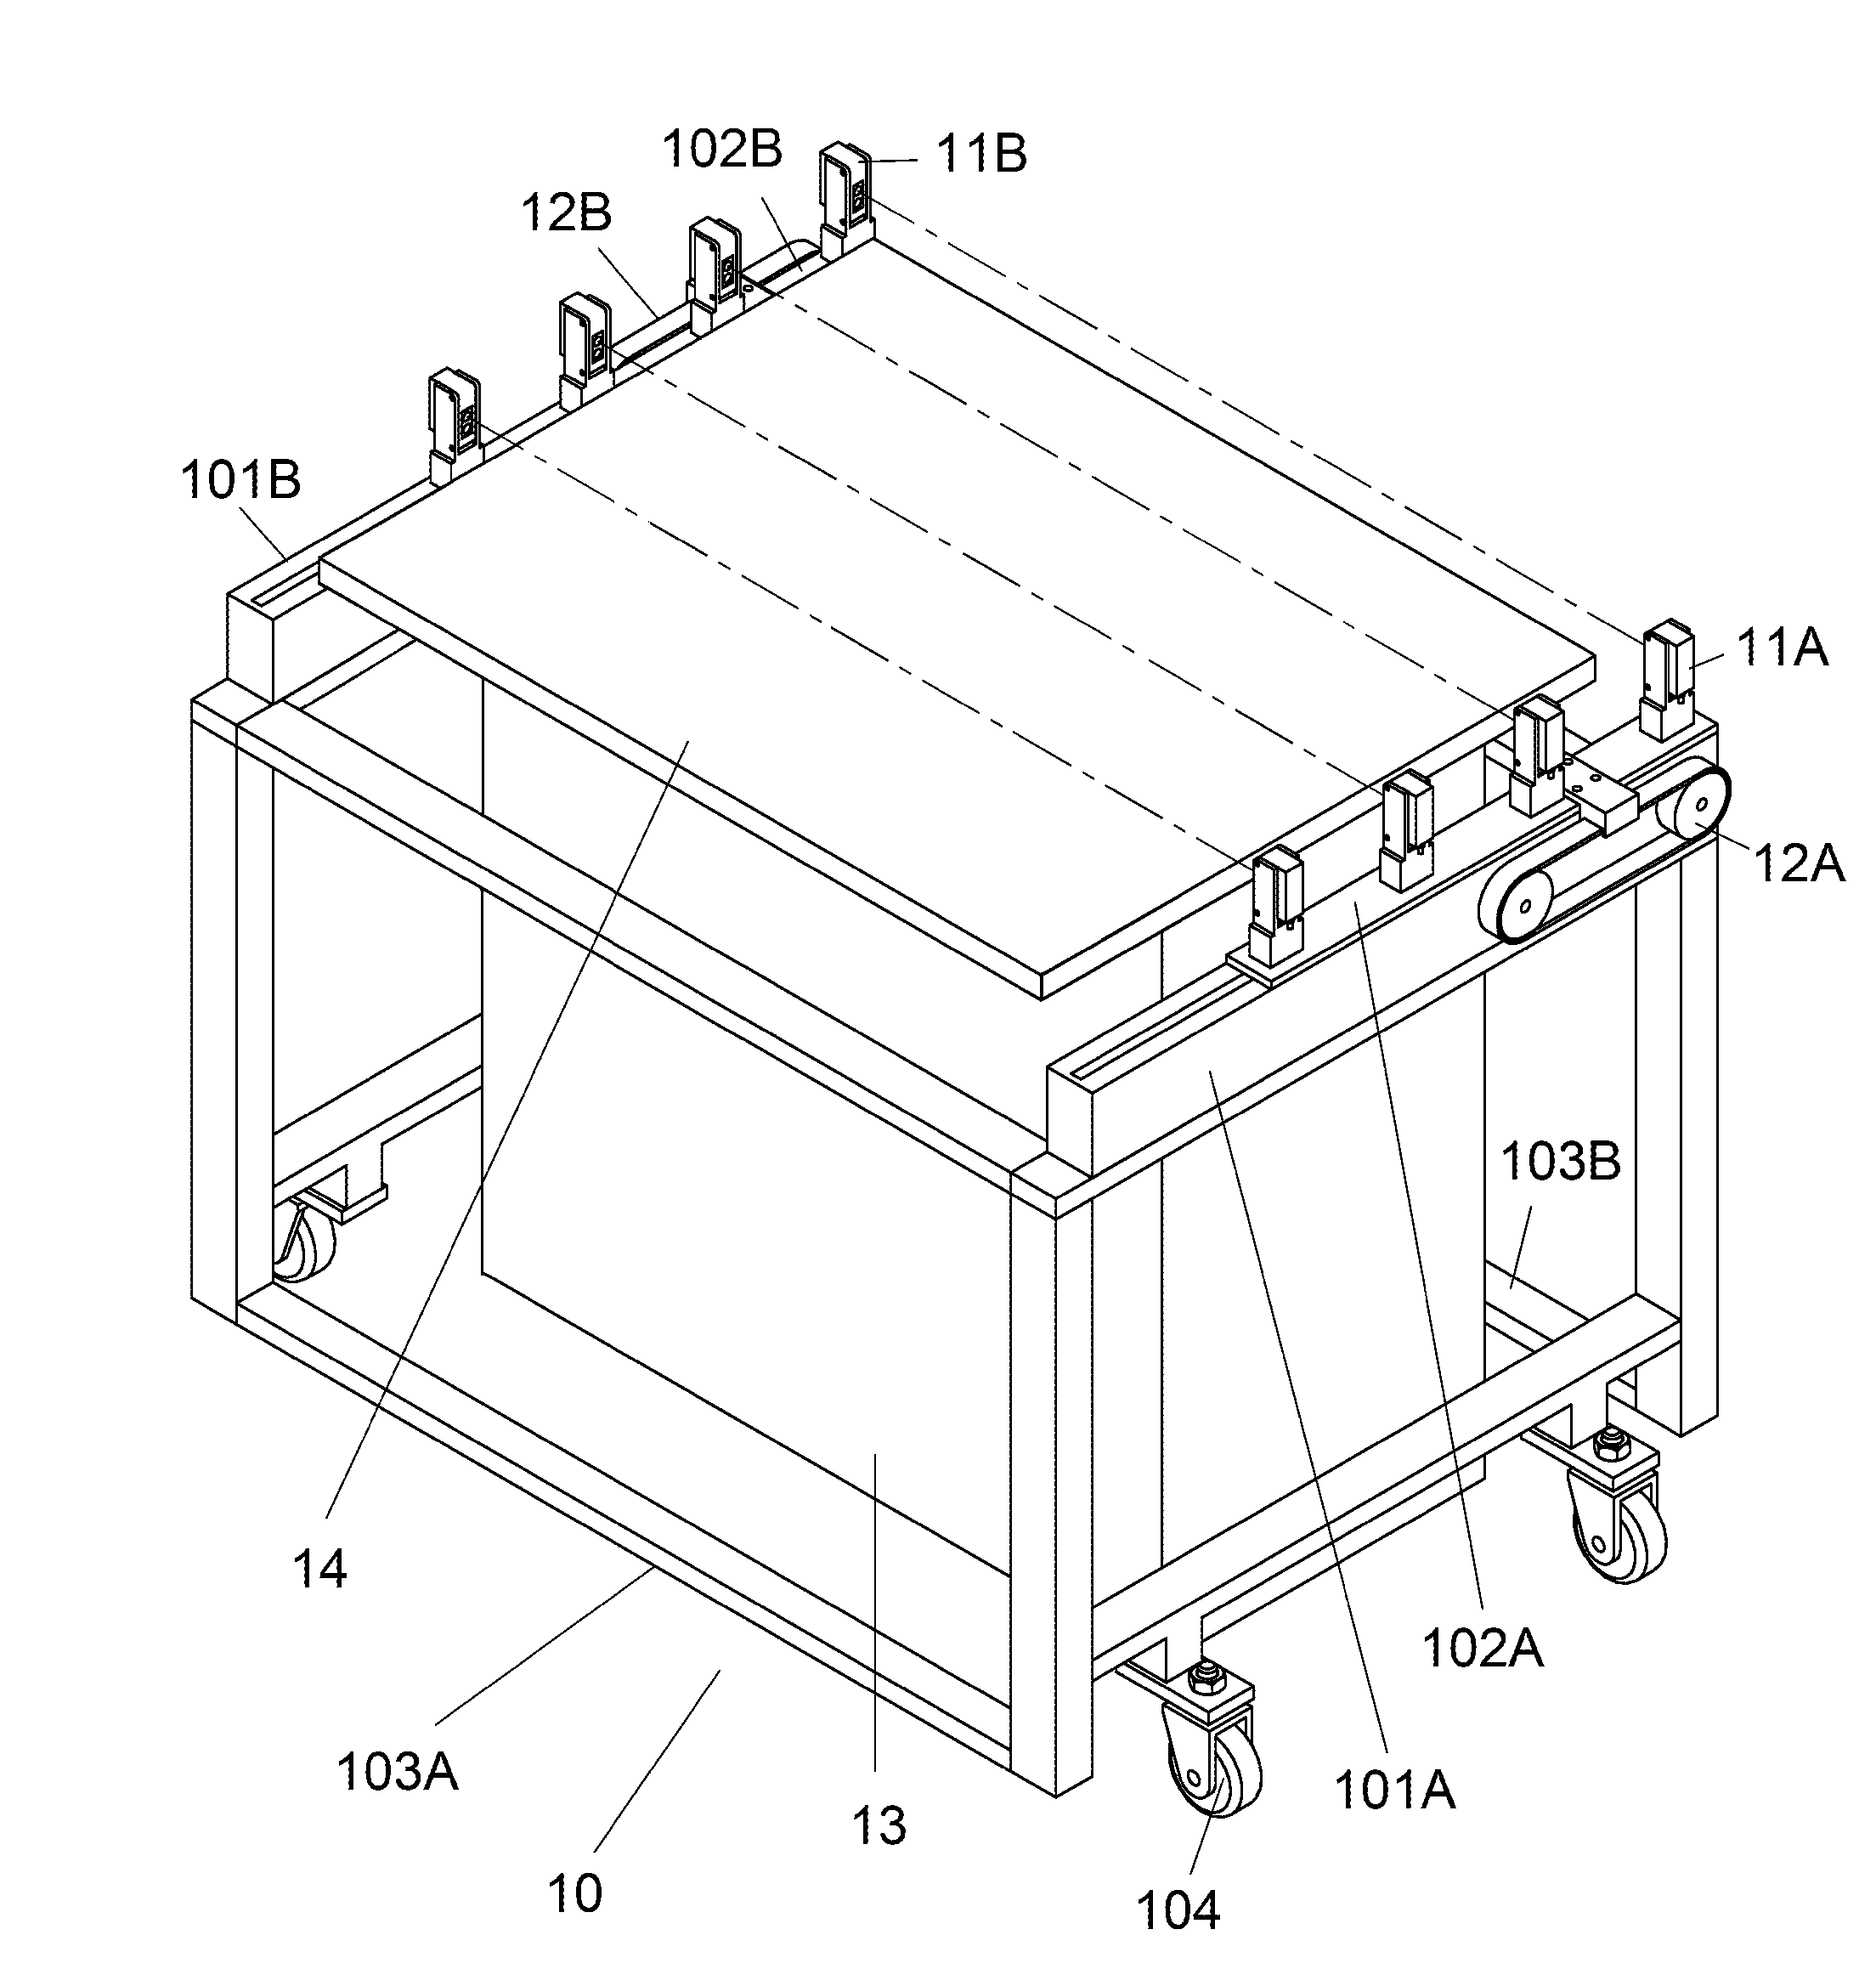 Apparatus for detecting heights of defects on optical glass